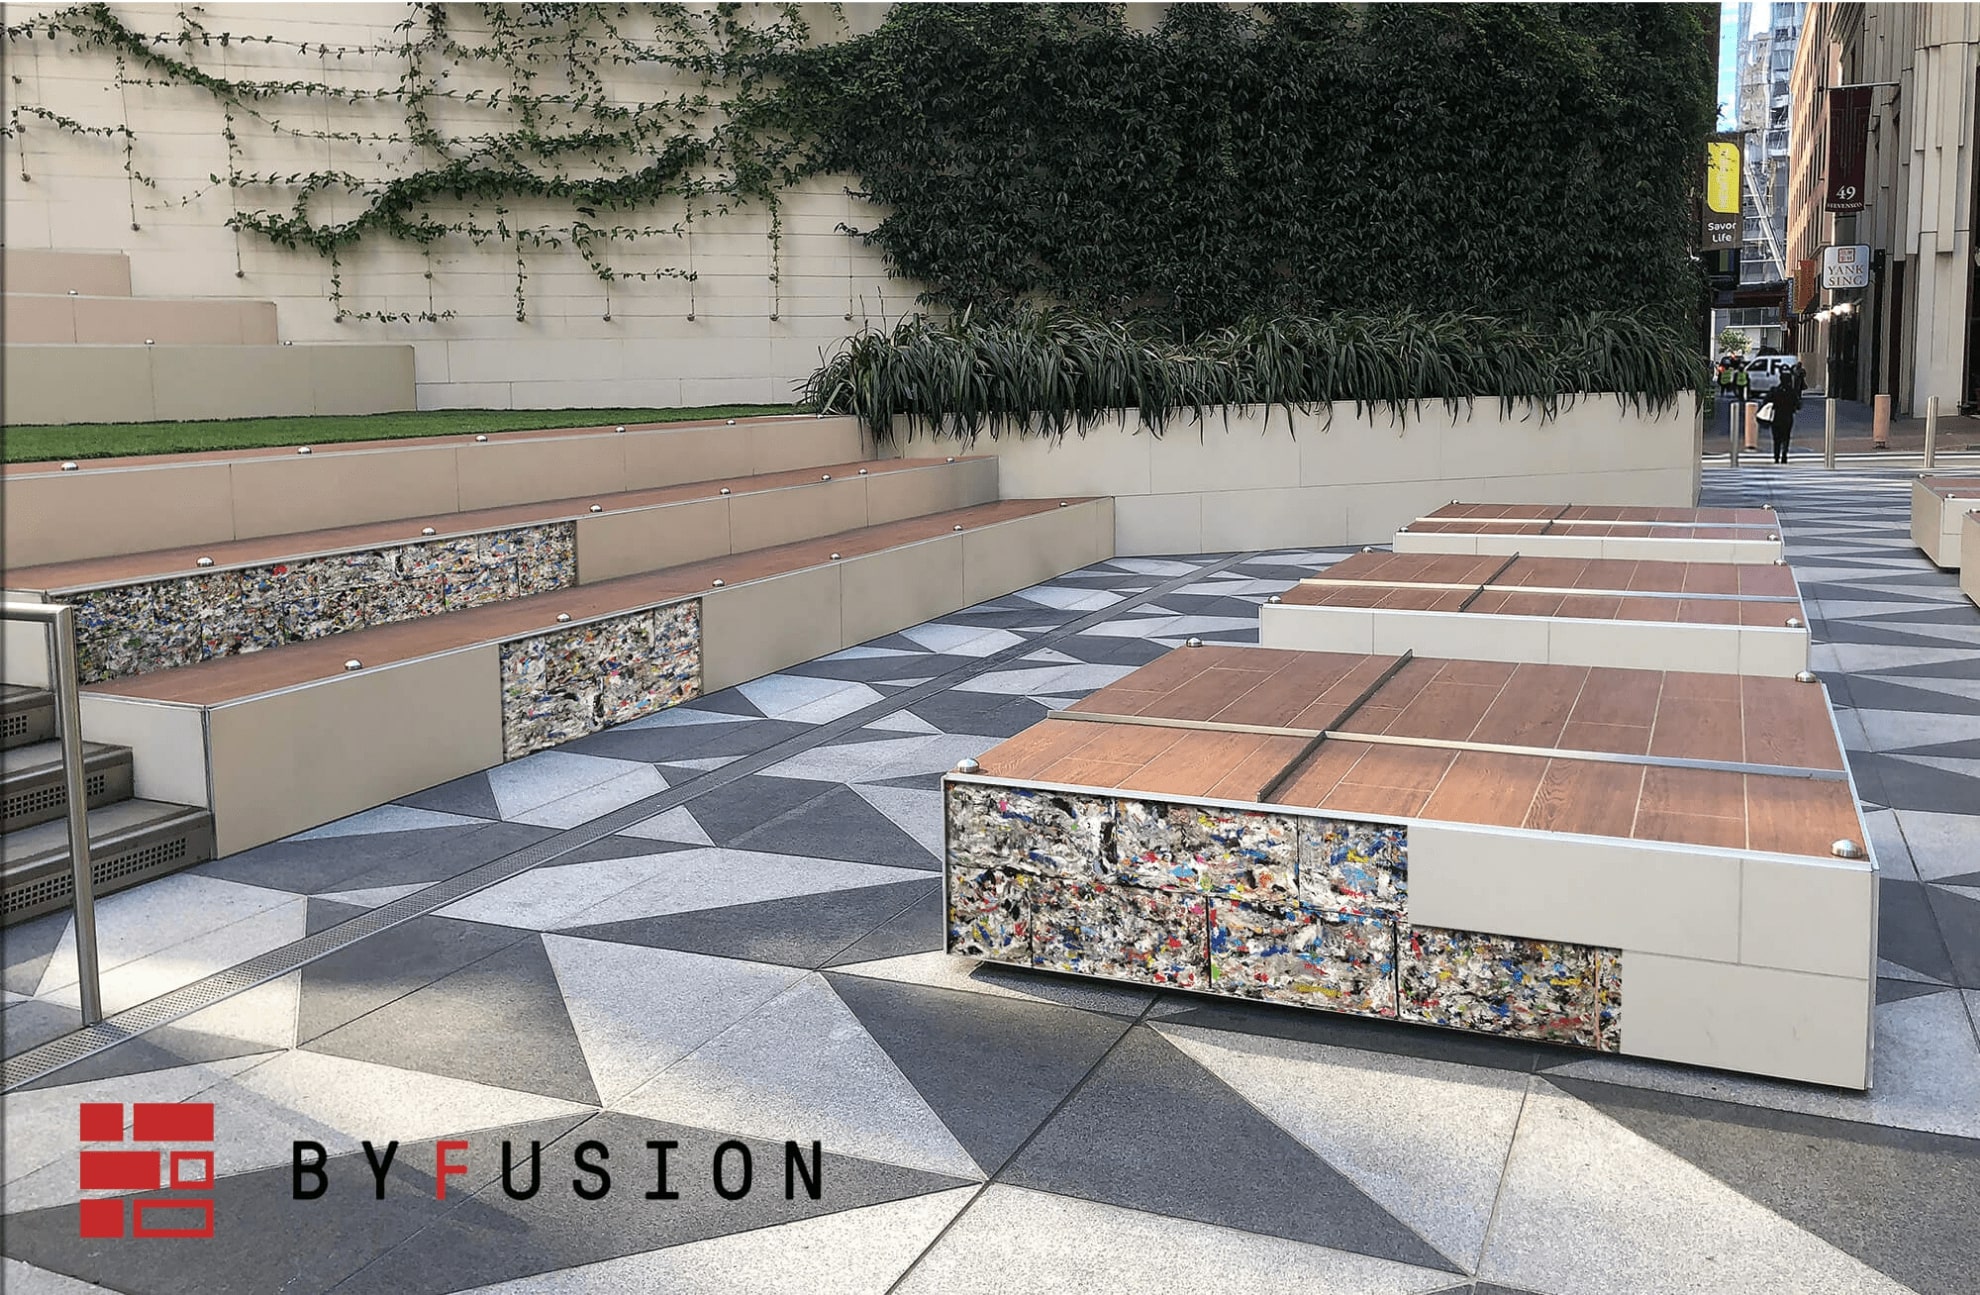 The blocks are 10 pounds lighter and more durable than hollow cement blocks. They can be clad with any kind of material or left exposed, but since plastics are susceptible to sunlight, outdoor projects would have to be coated in clear paint or paired with another weather-resistant material.